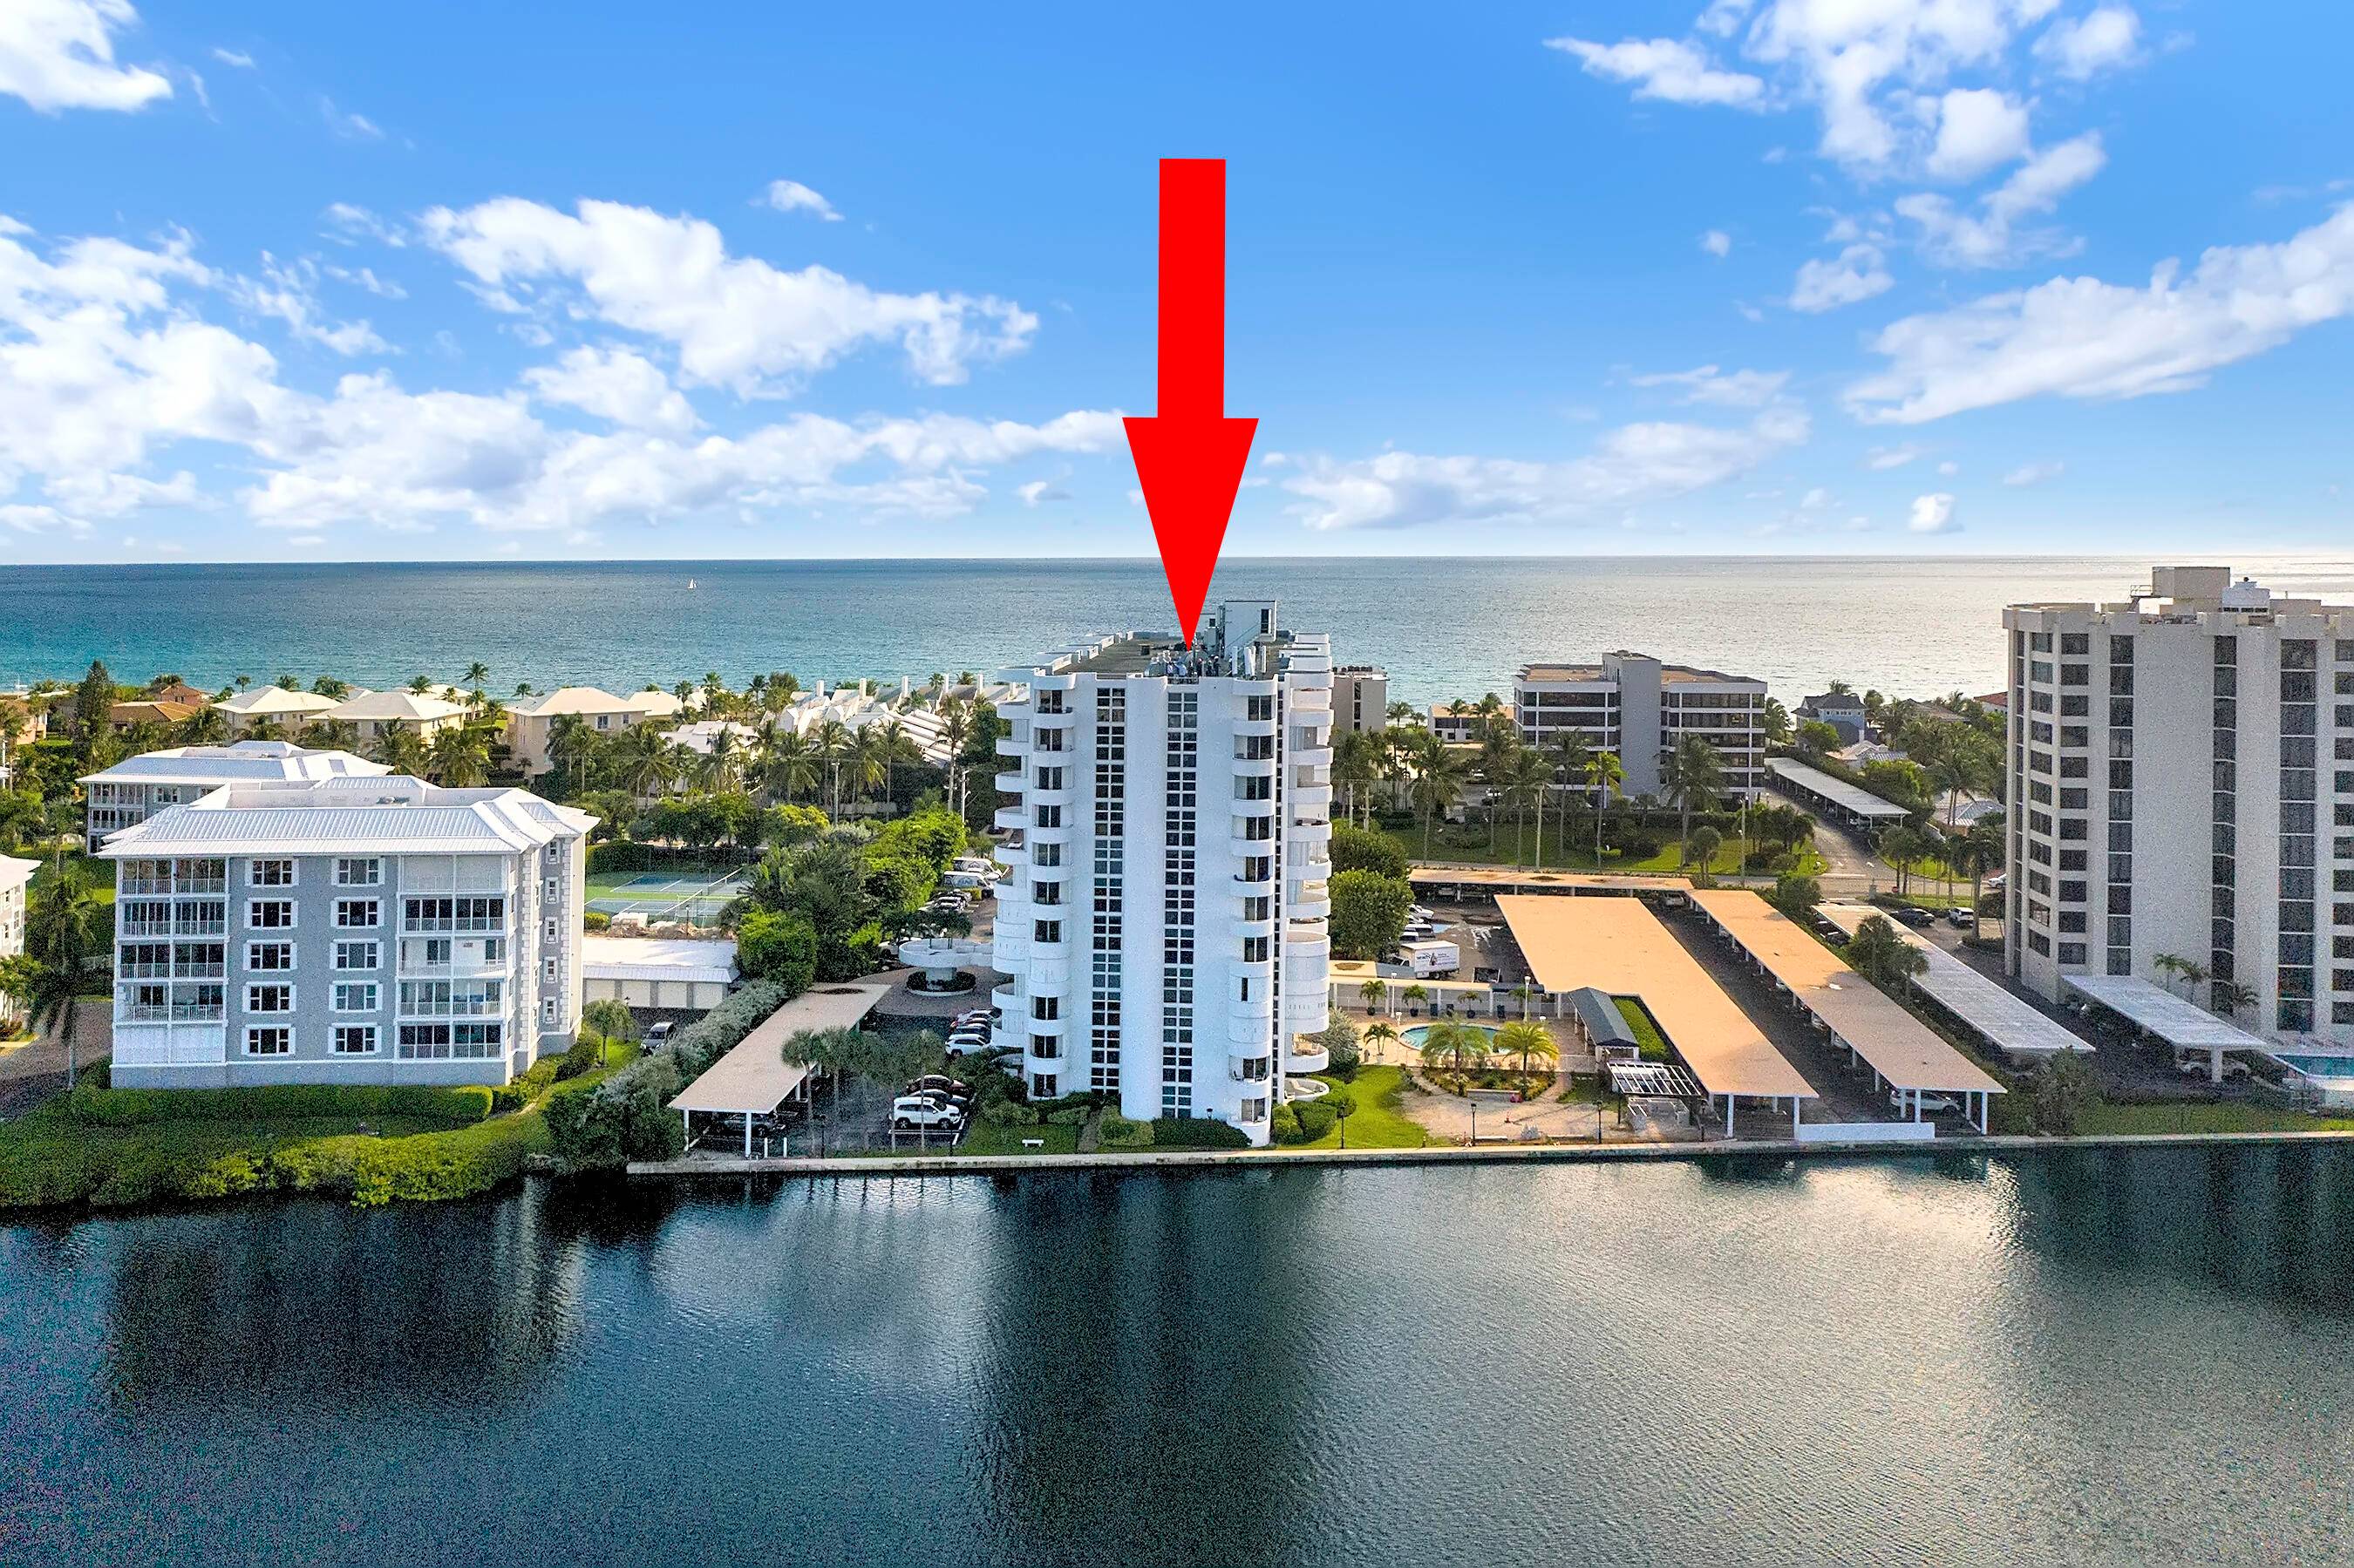 Sold Fully Furnished. Welcome to your penthouse with breathtaking views of the ocean and intracoastal in prestigious Delray Beach, Florida.